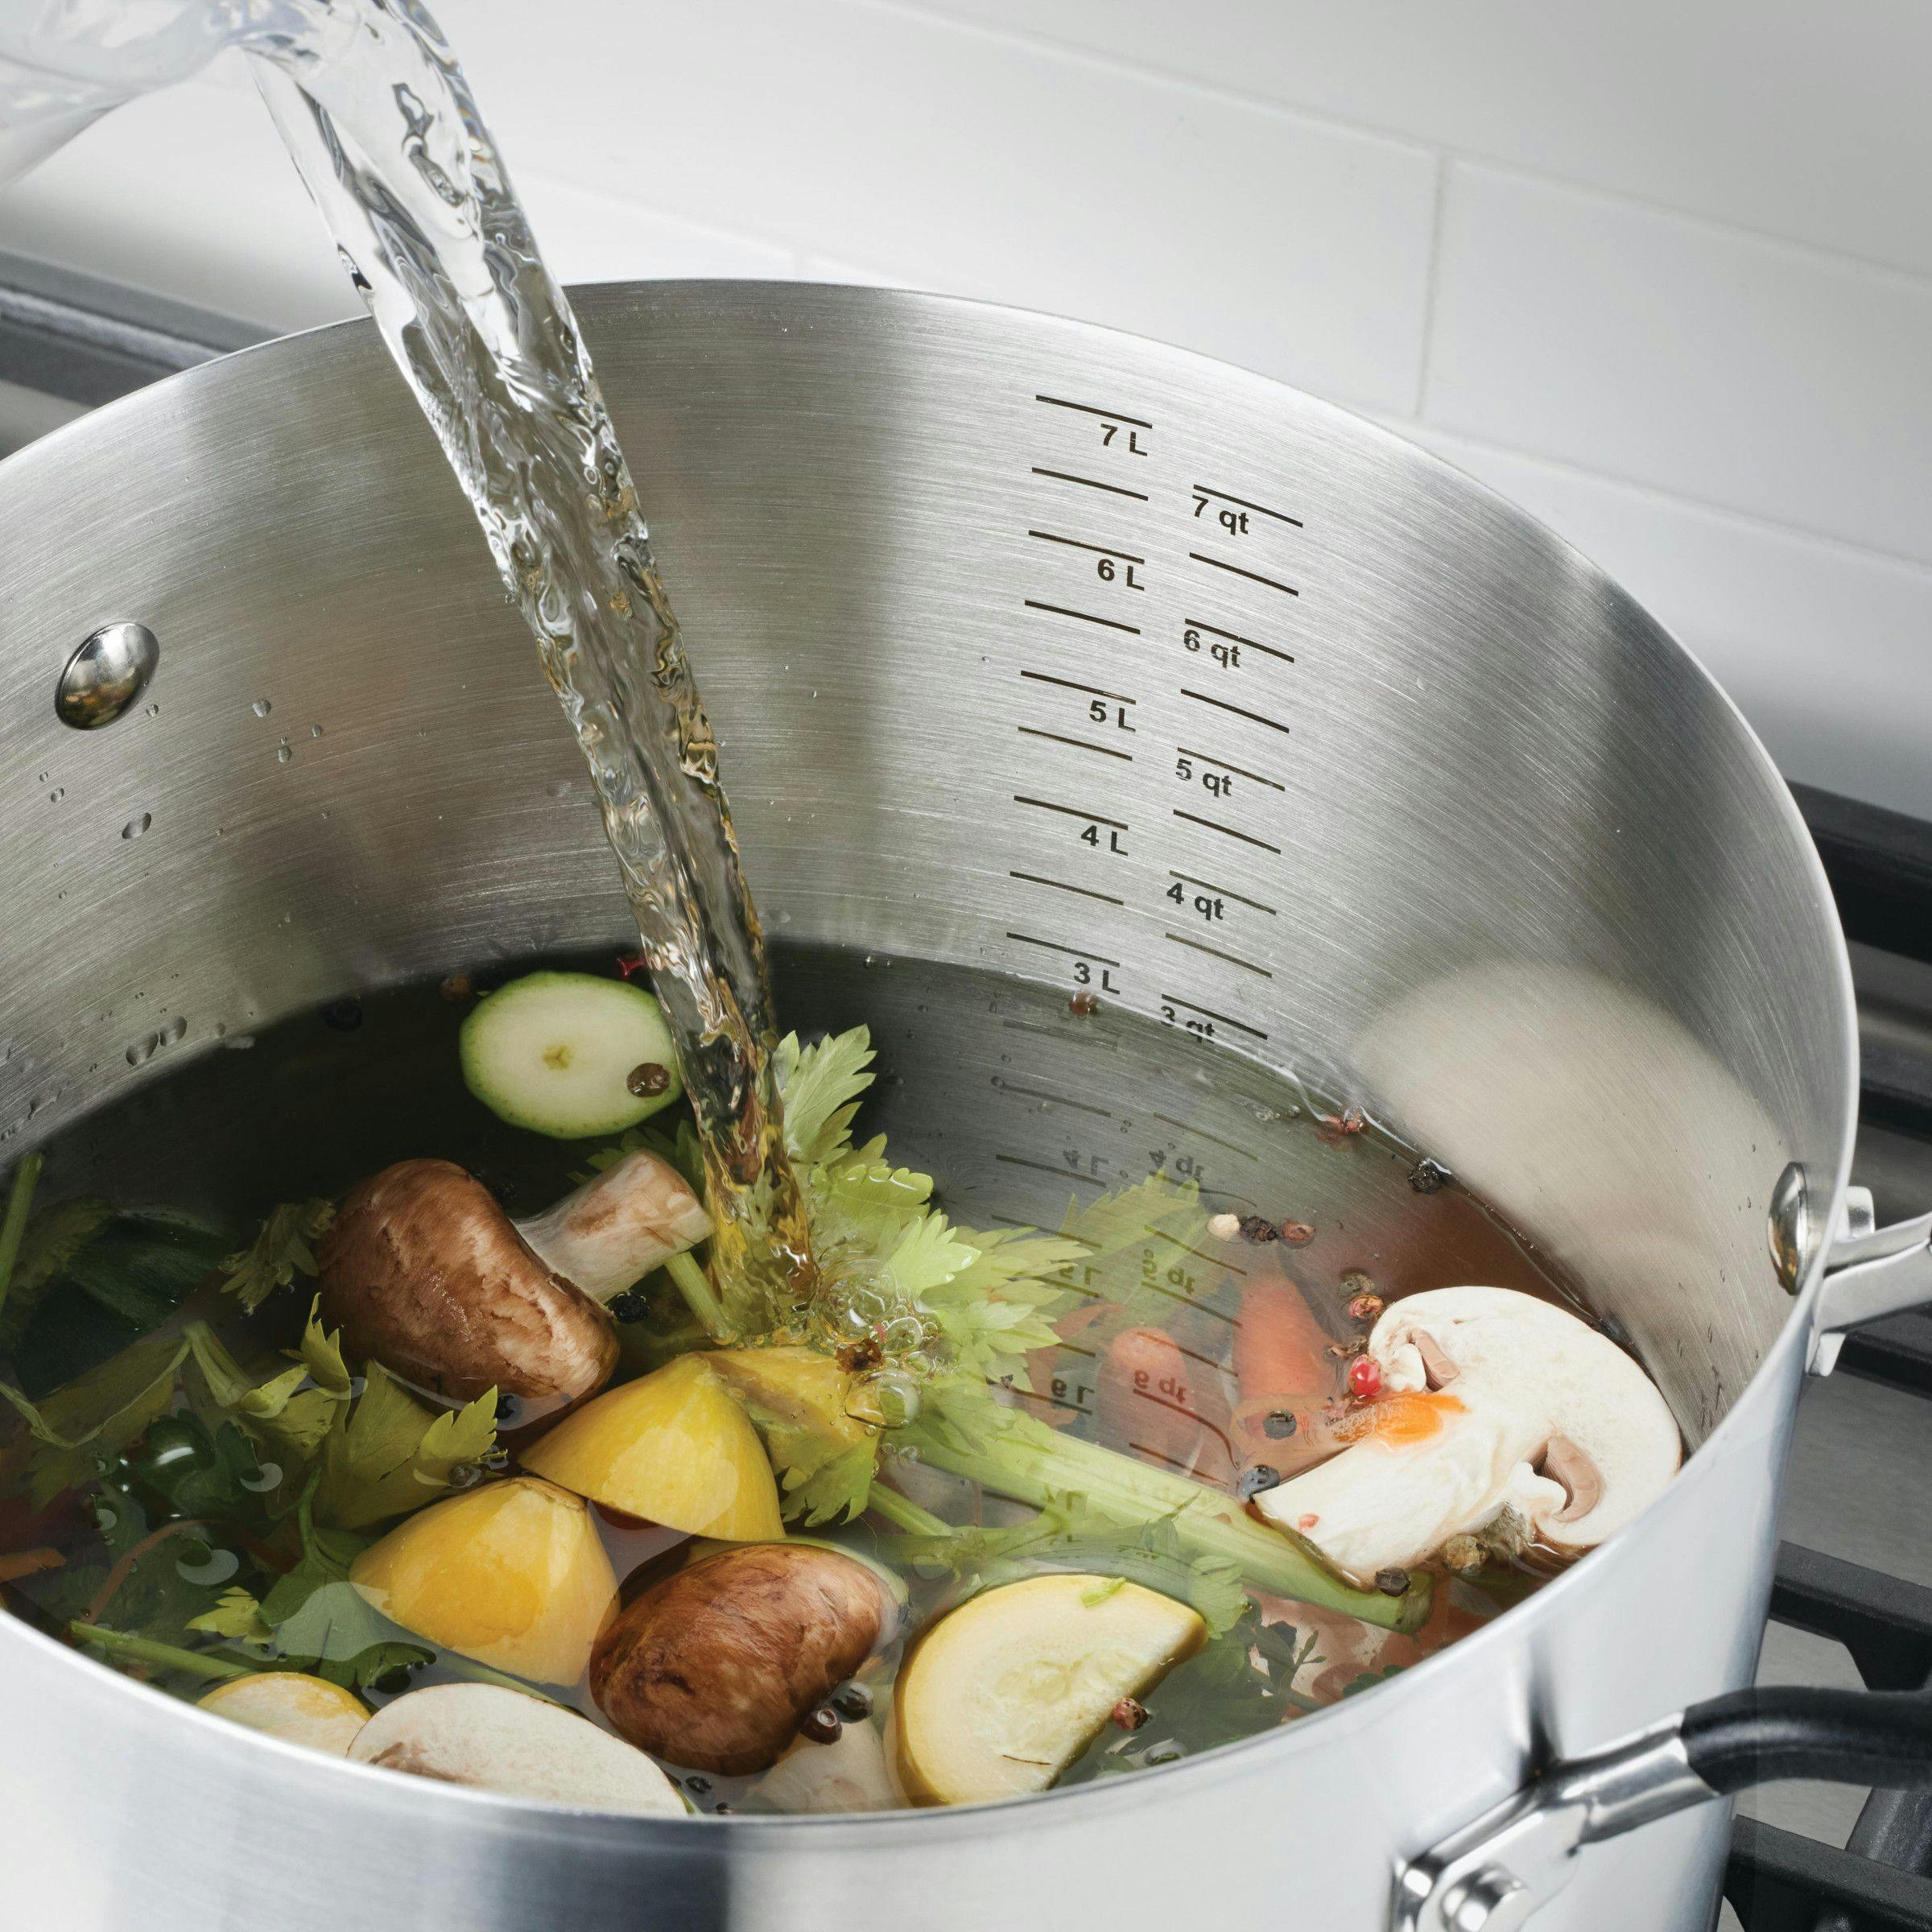 KitchenAid 8qt Stainless Steel 5-Ply Clad Stockpot with Lid in the